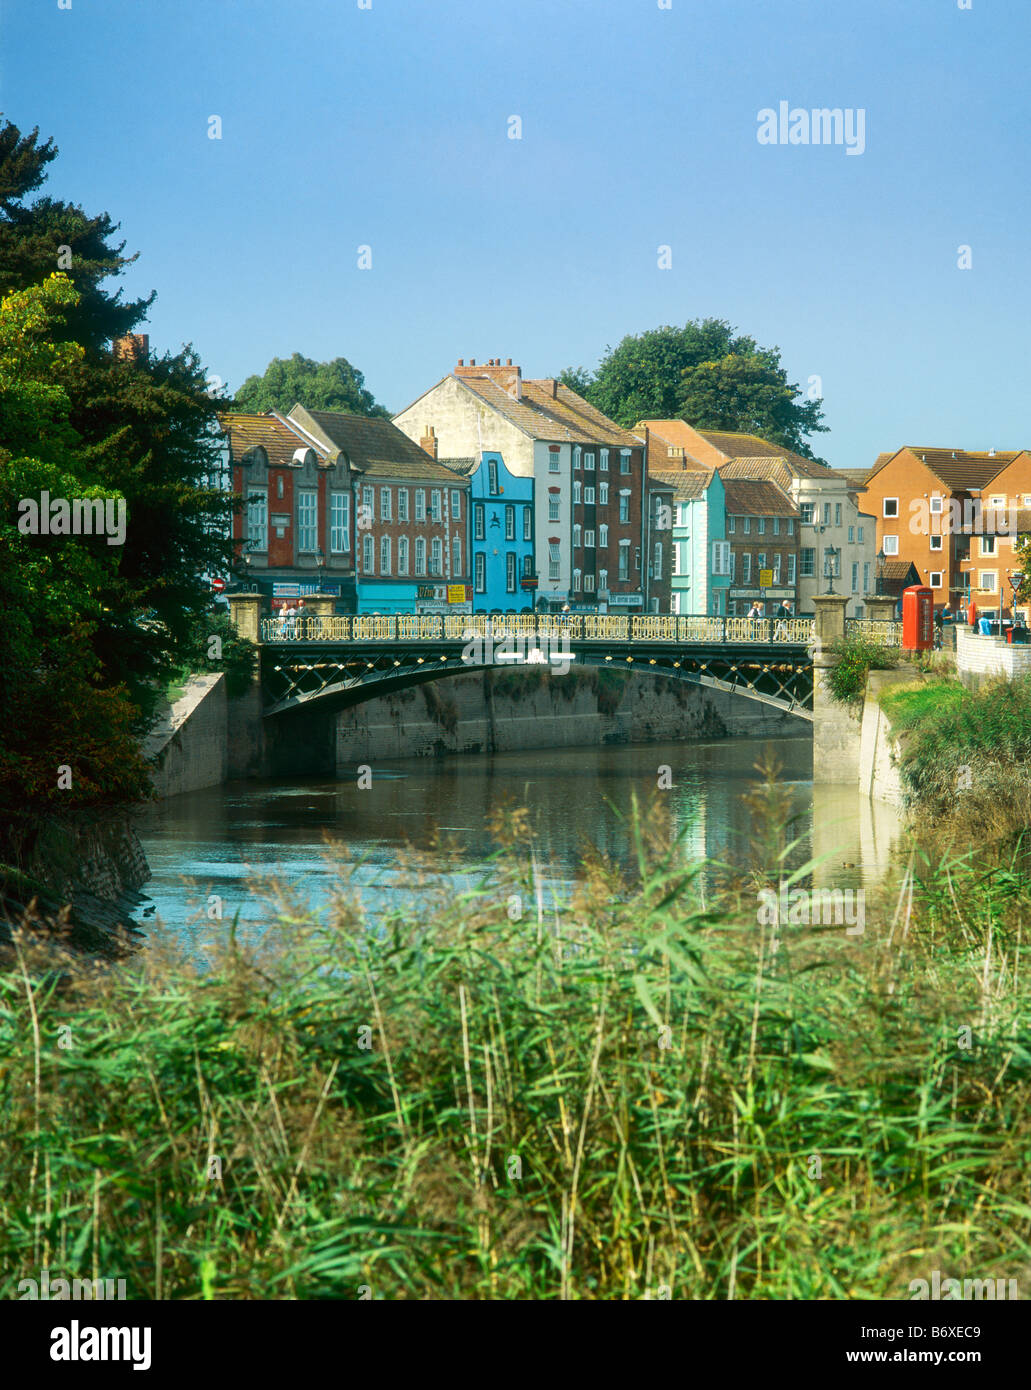 The cast iron Town Bridge or Bridgwater Bridge over the River Parrett at Bridgwater, Somerset, England with West Quay beyond. Stock Photo